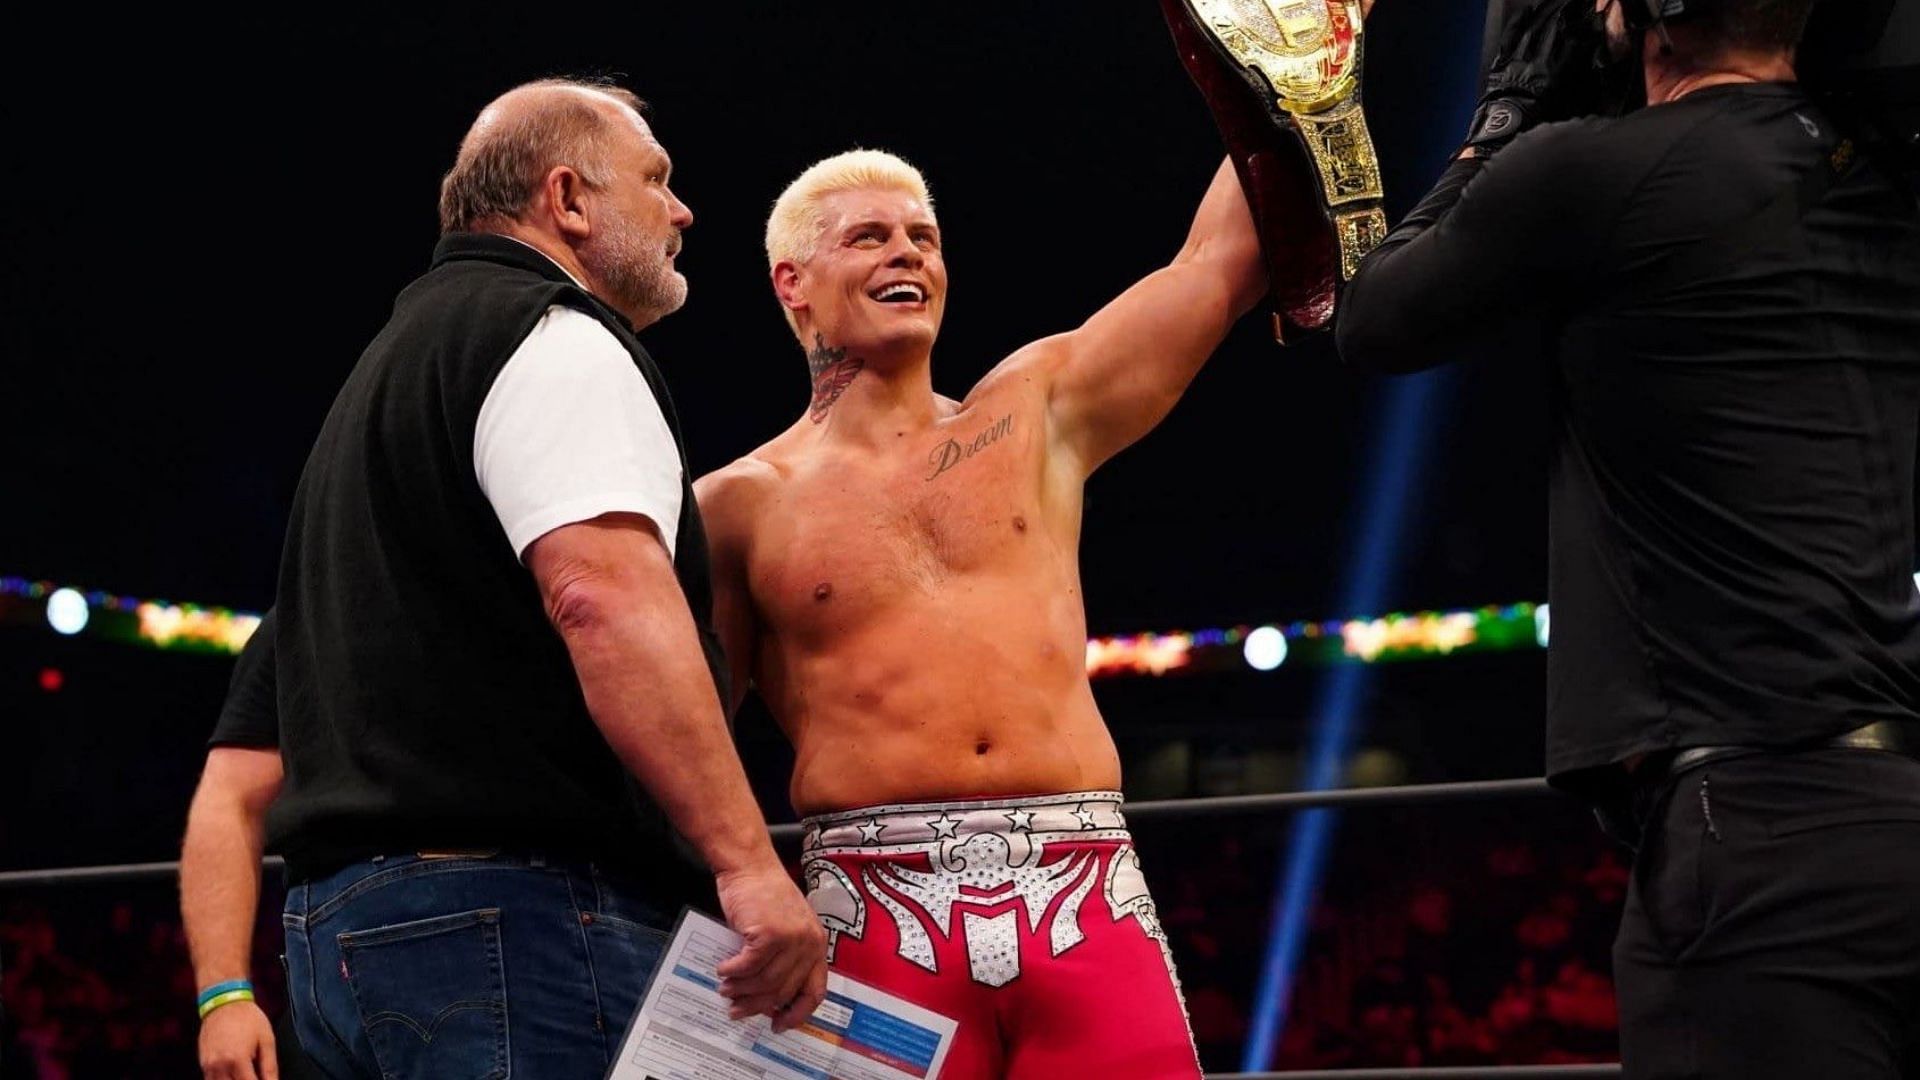 Cody Rhodes with Arn Anderson and the TNT championship